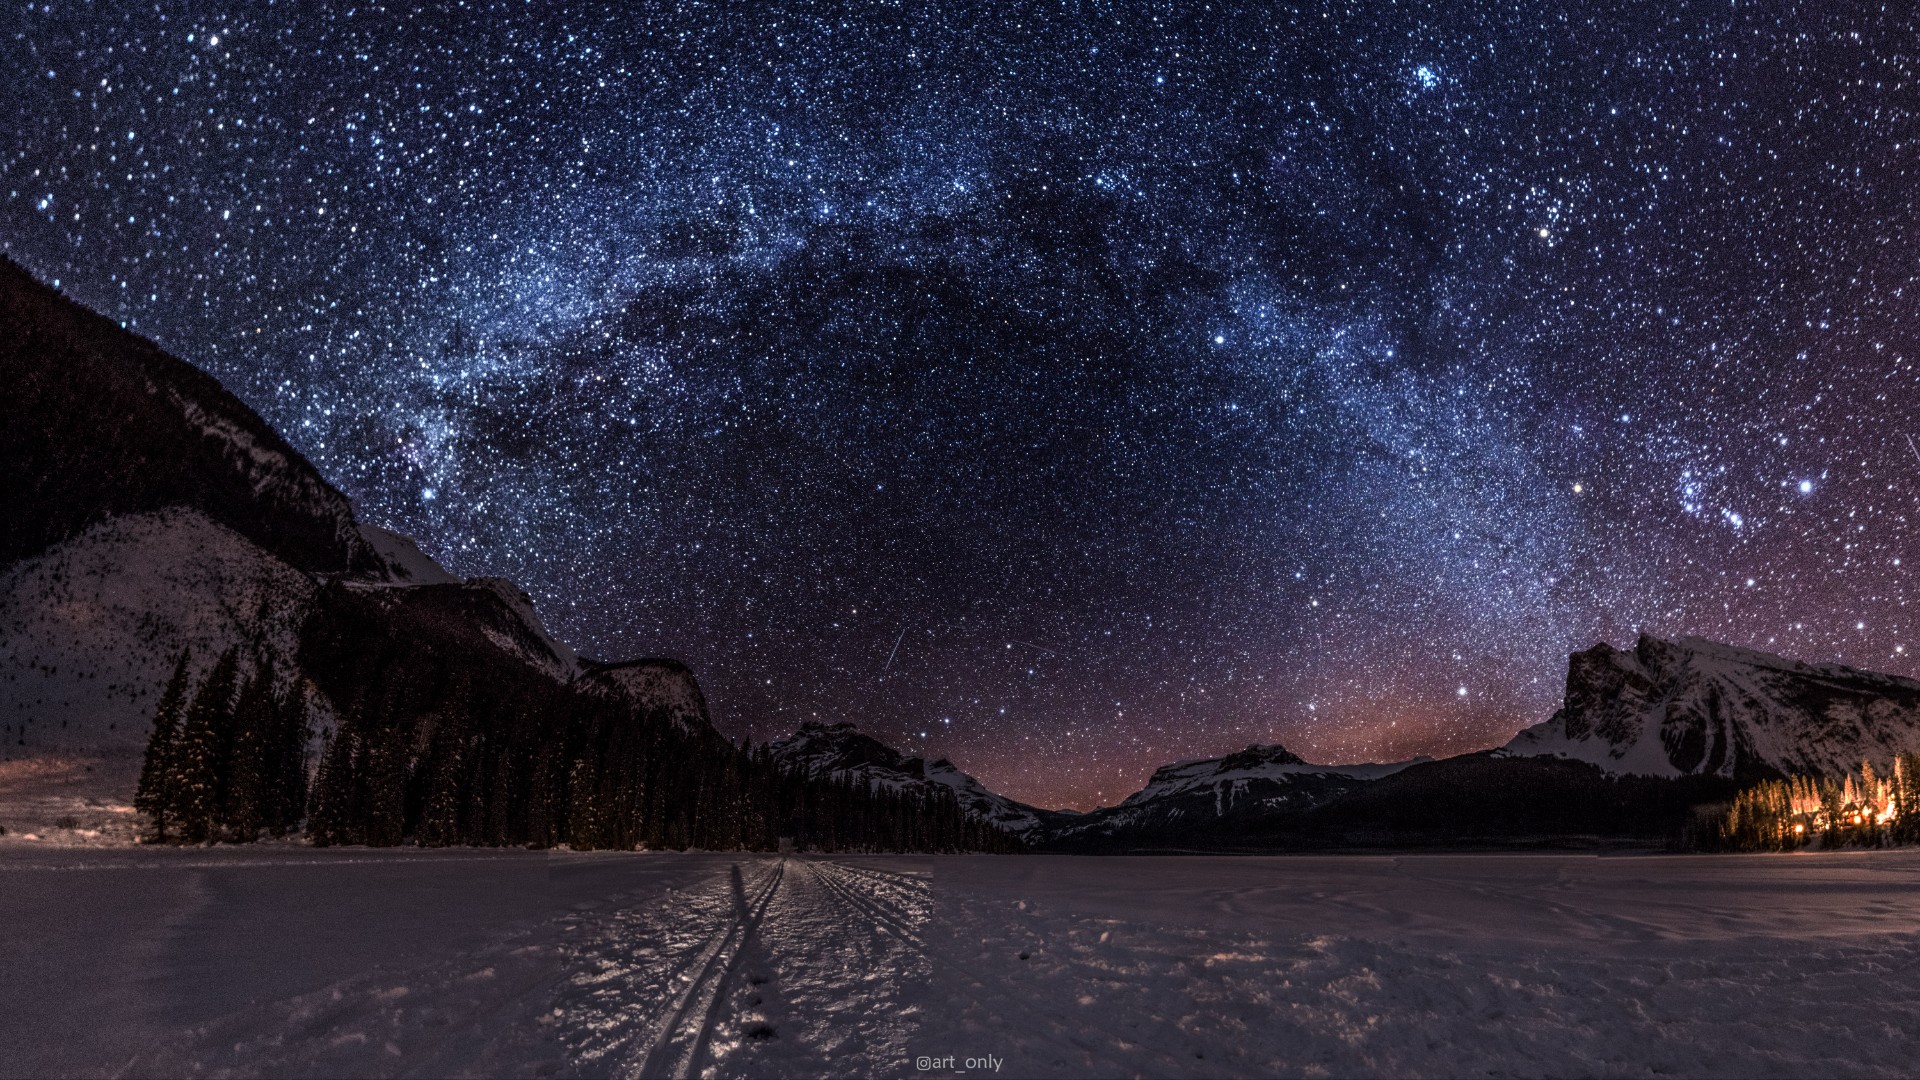 The night sky at Emerald Lake, BC on a cold winter night [OC ...